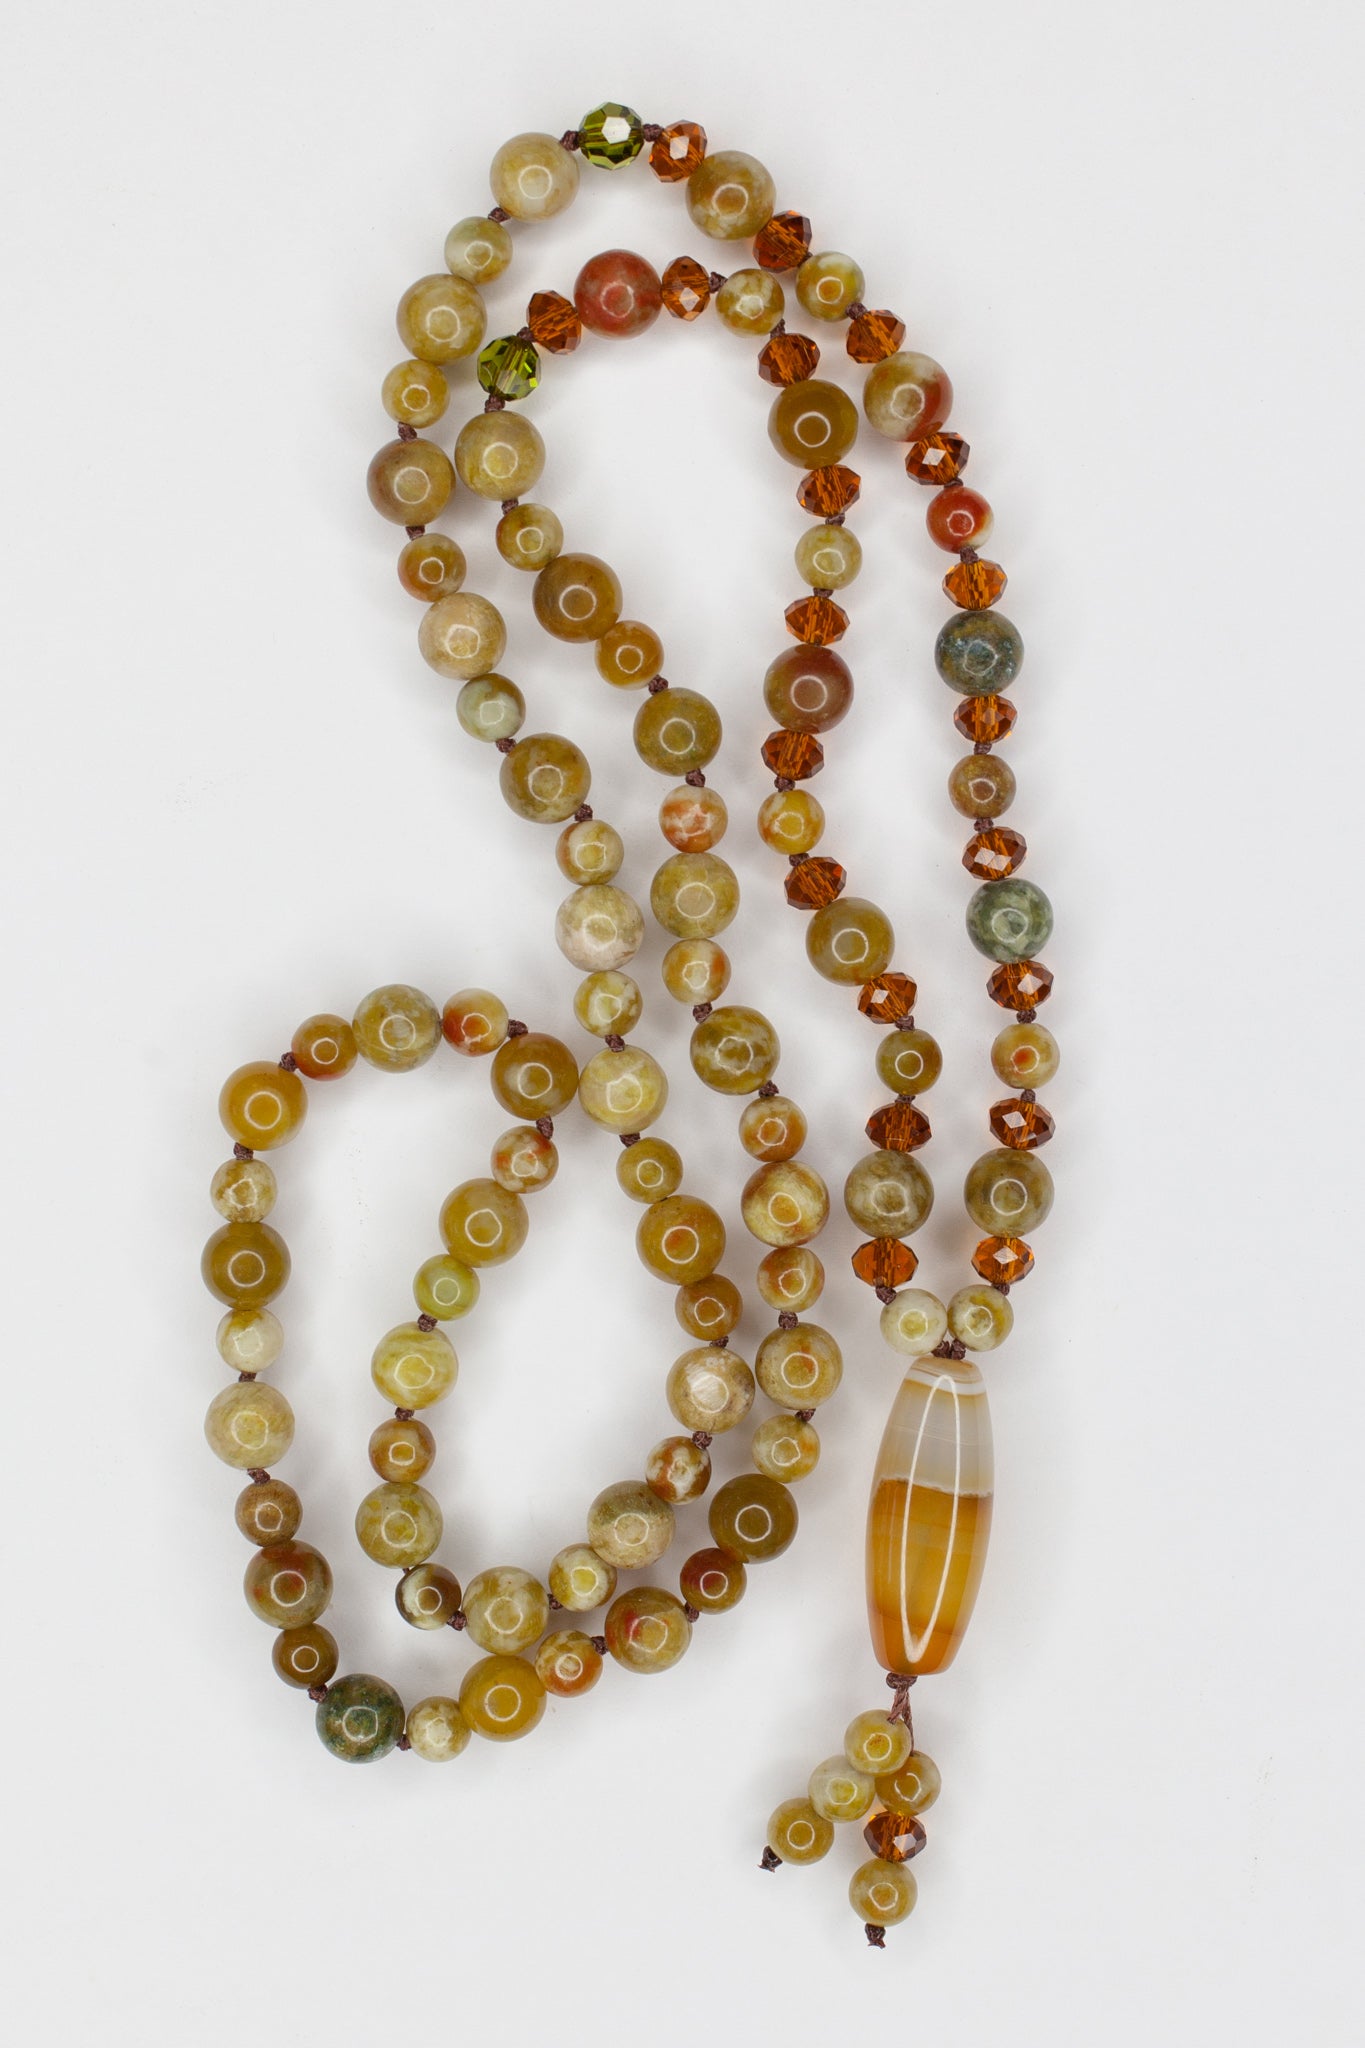 29" Long Agate Pendant Necklace with Green Dragon Jasper & Crystal Beads